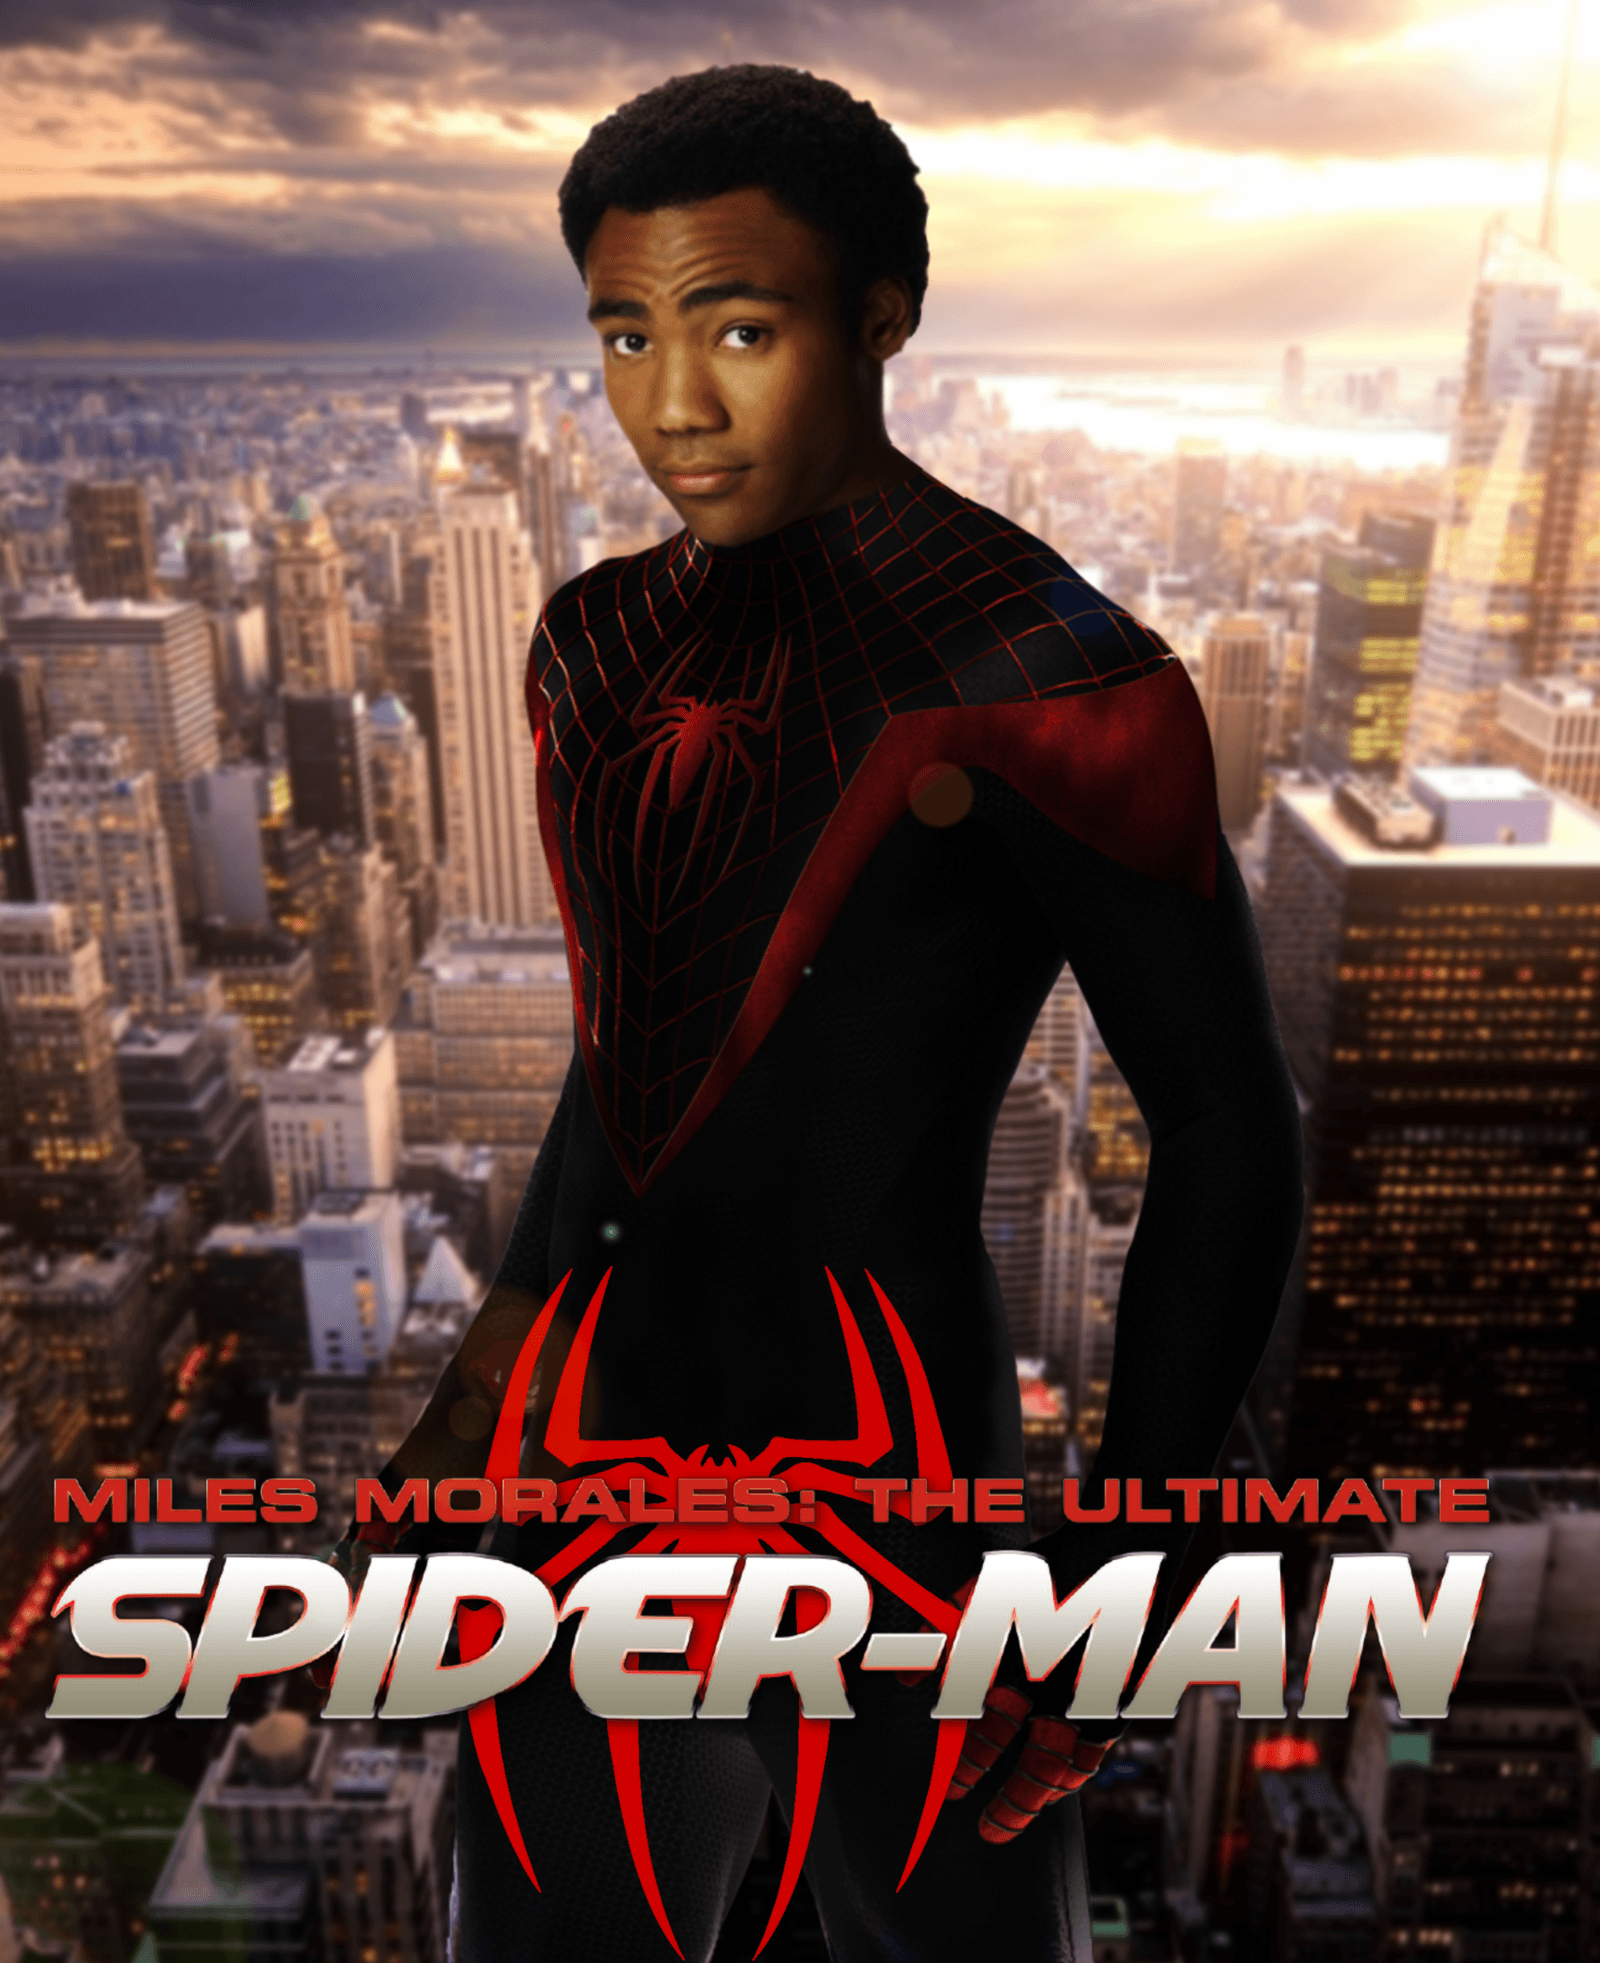 Donald Glover as Miles Morales